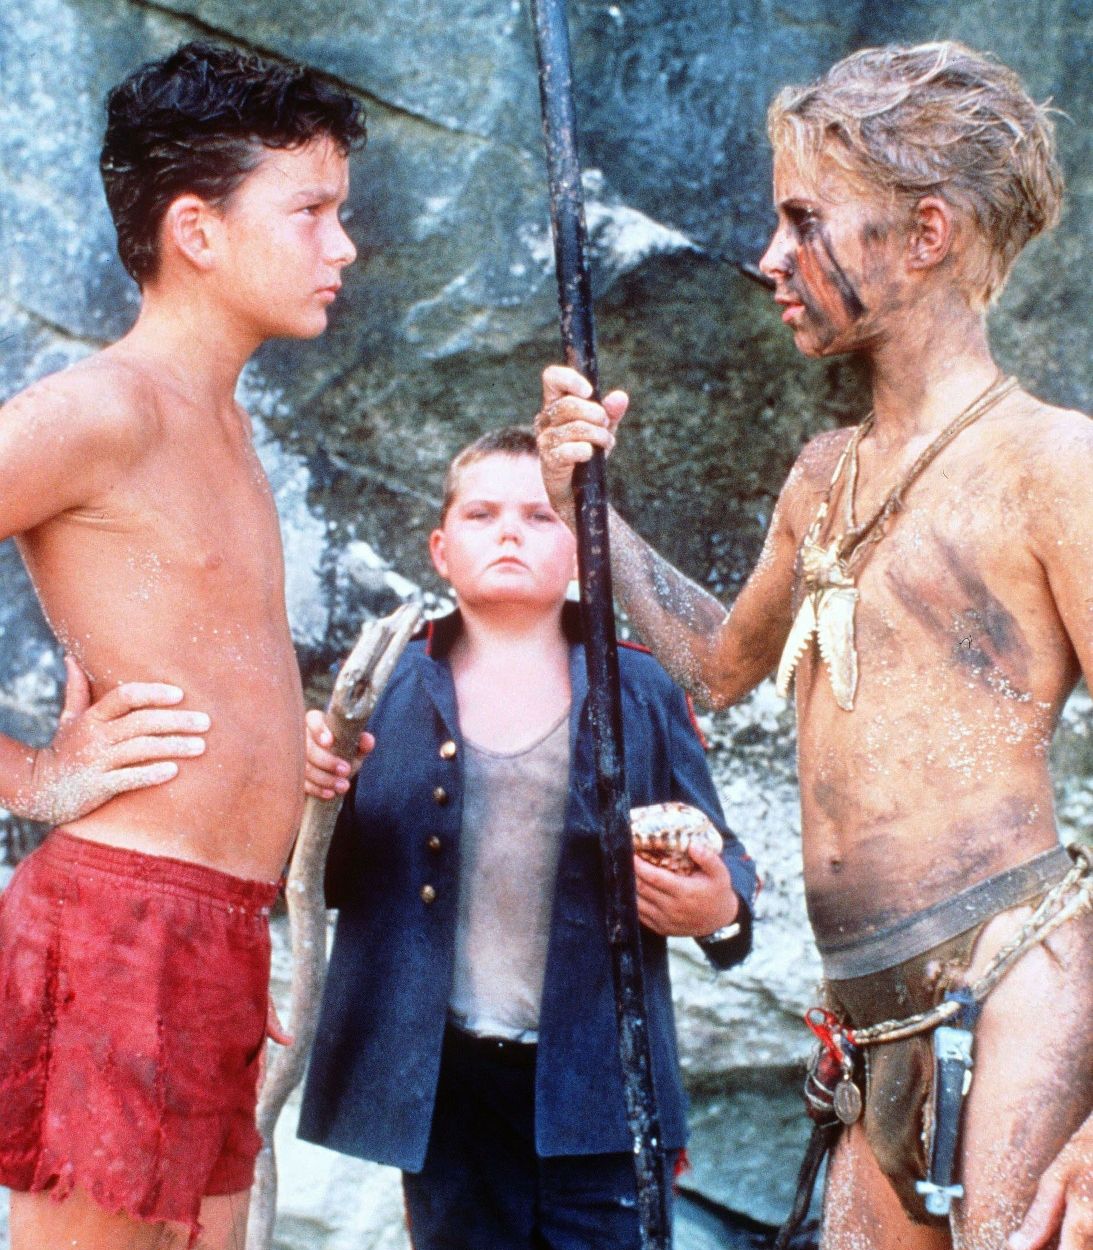 lord of the flies 1990 remake TLDR vertical